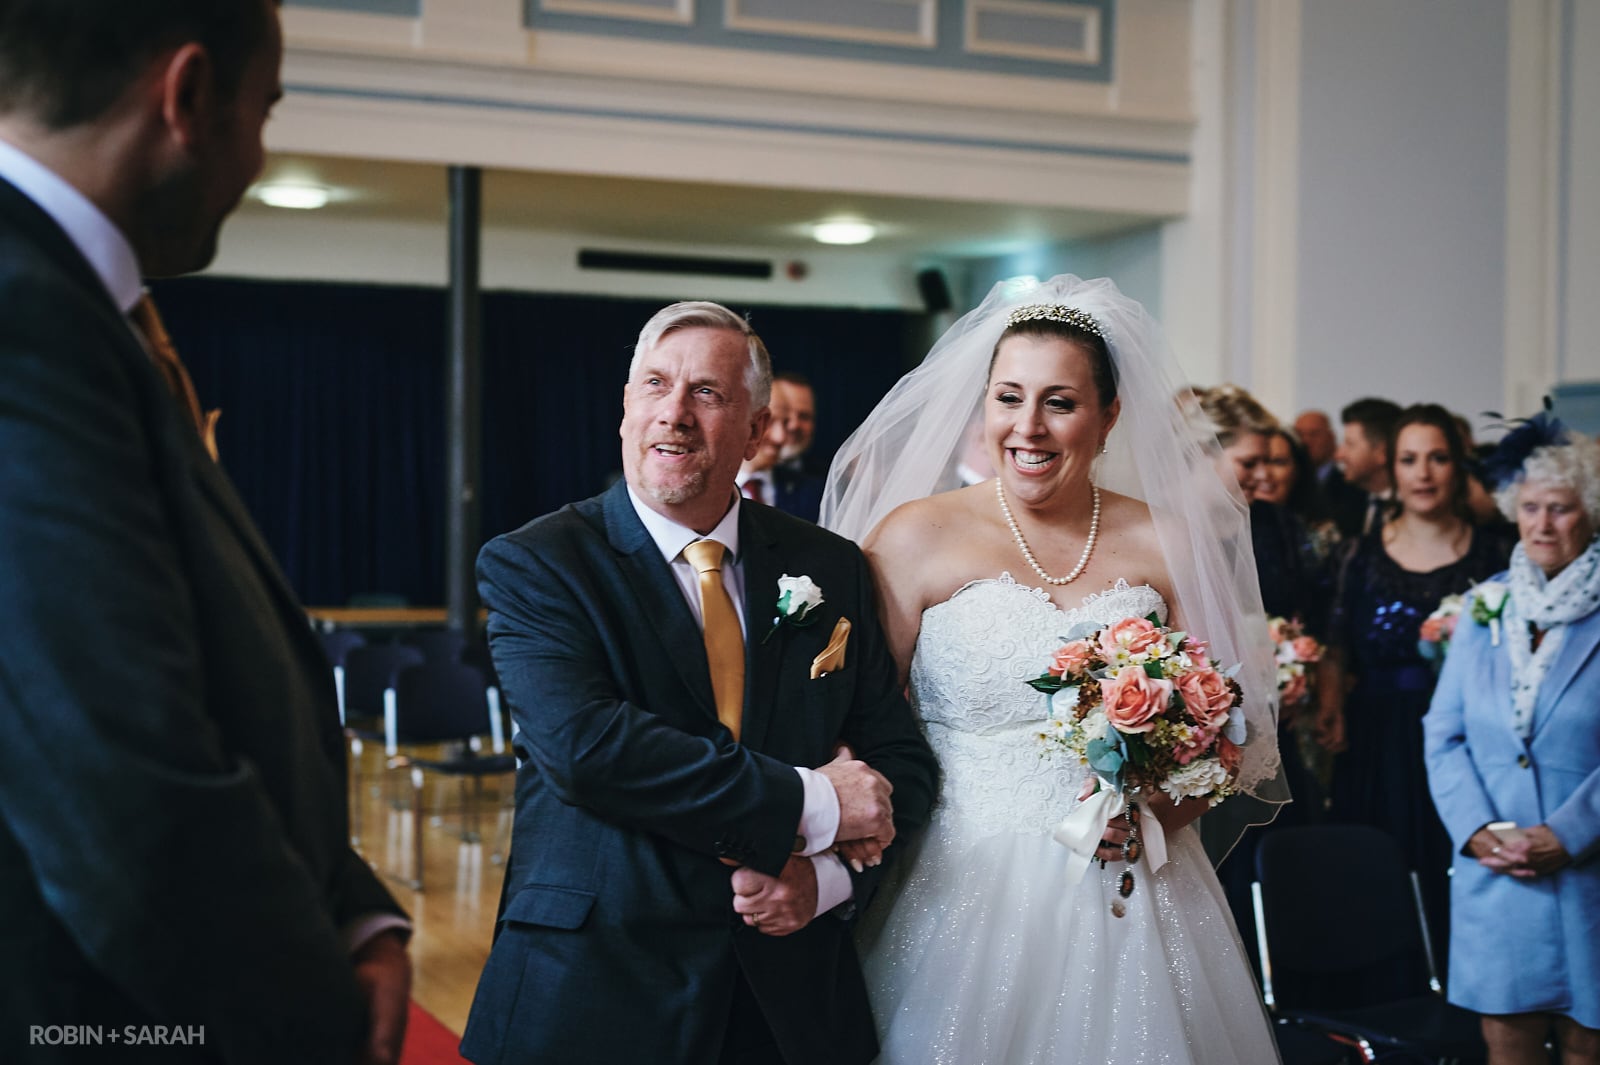 Bride and dad walk up aisle during wedding ceremony